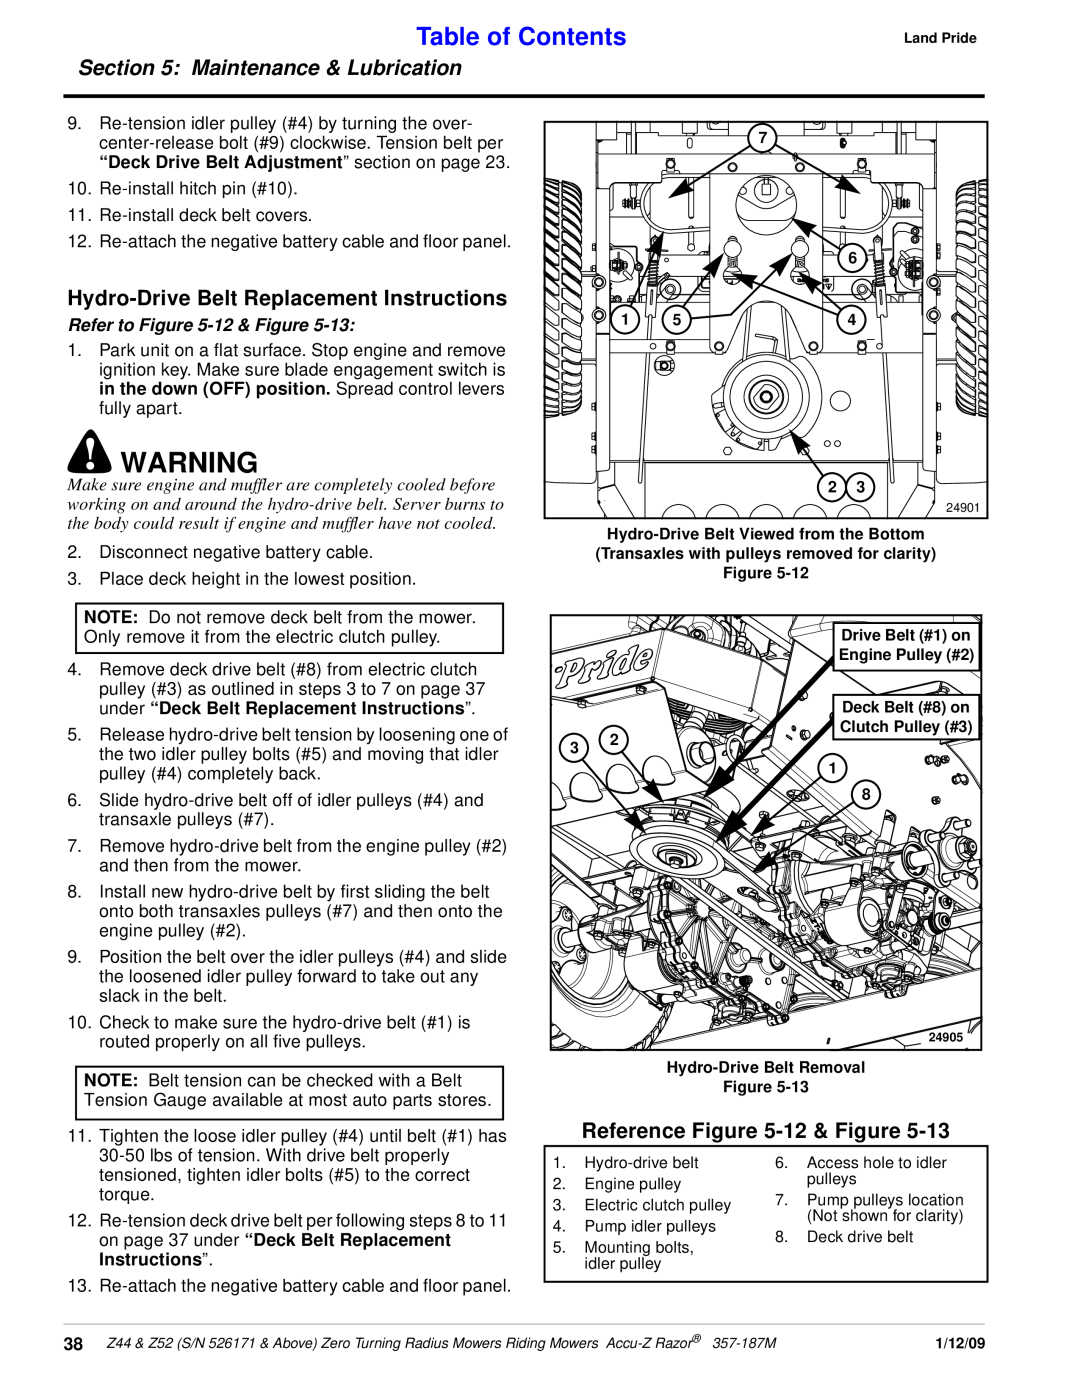 Land Pride 357-187M manual Hydro-Drive Belt Replacement Instructions, Reference -12 & Figure, Refer to -12 & Figure 